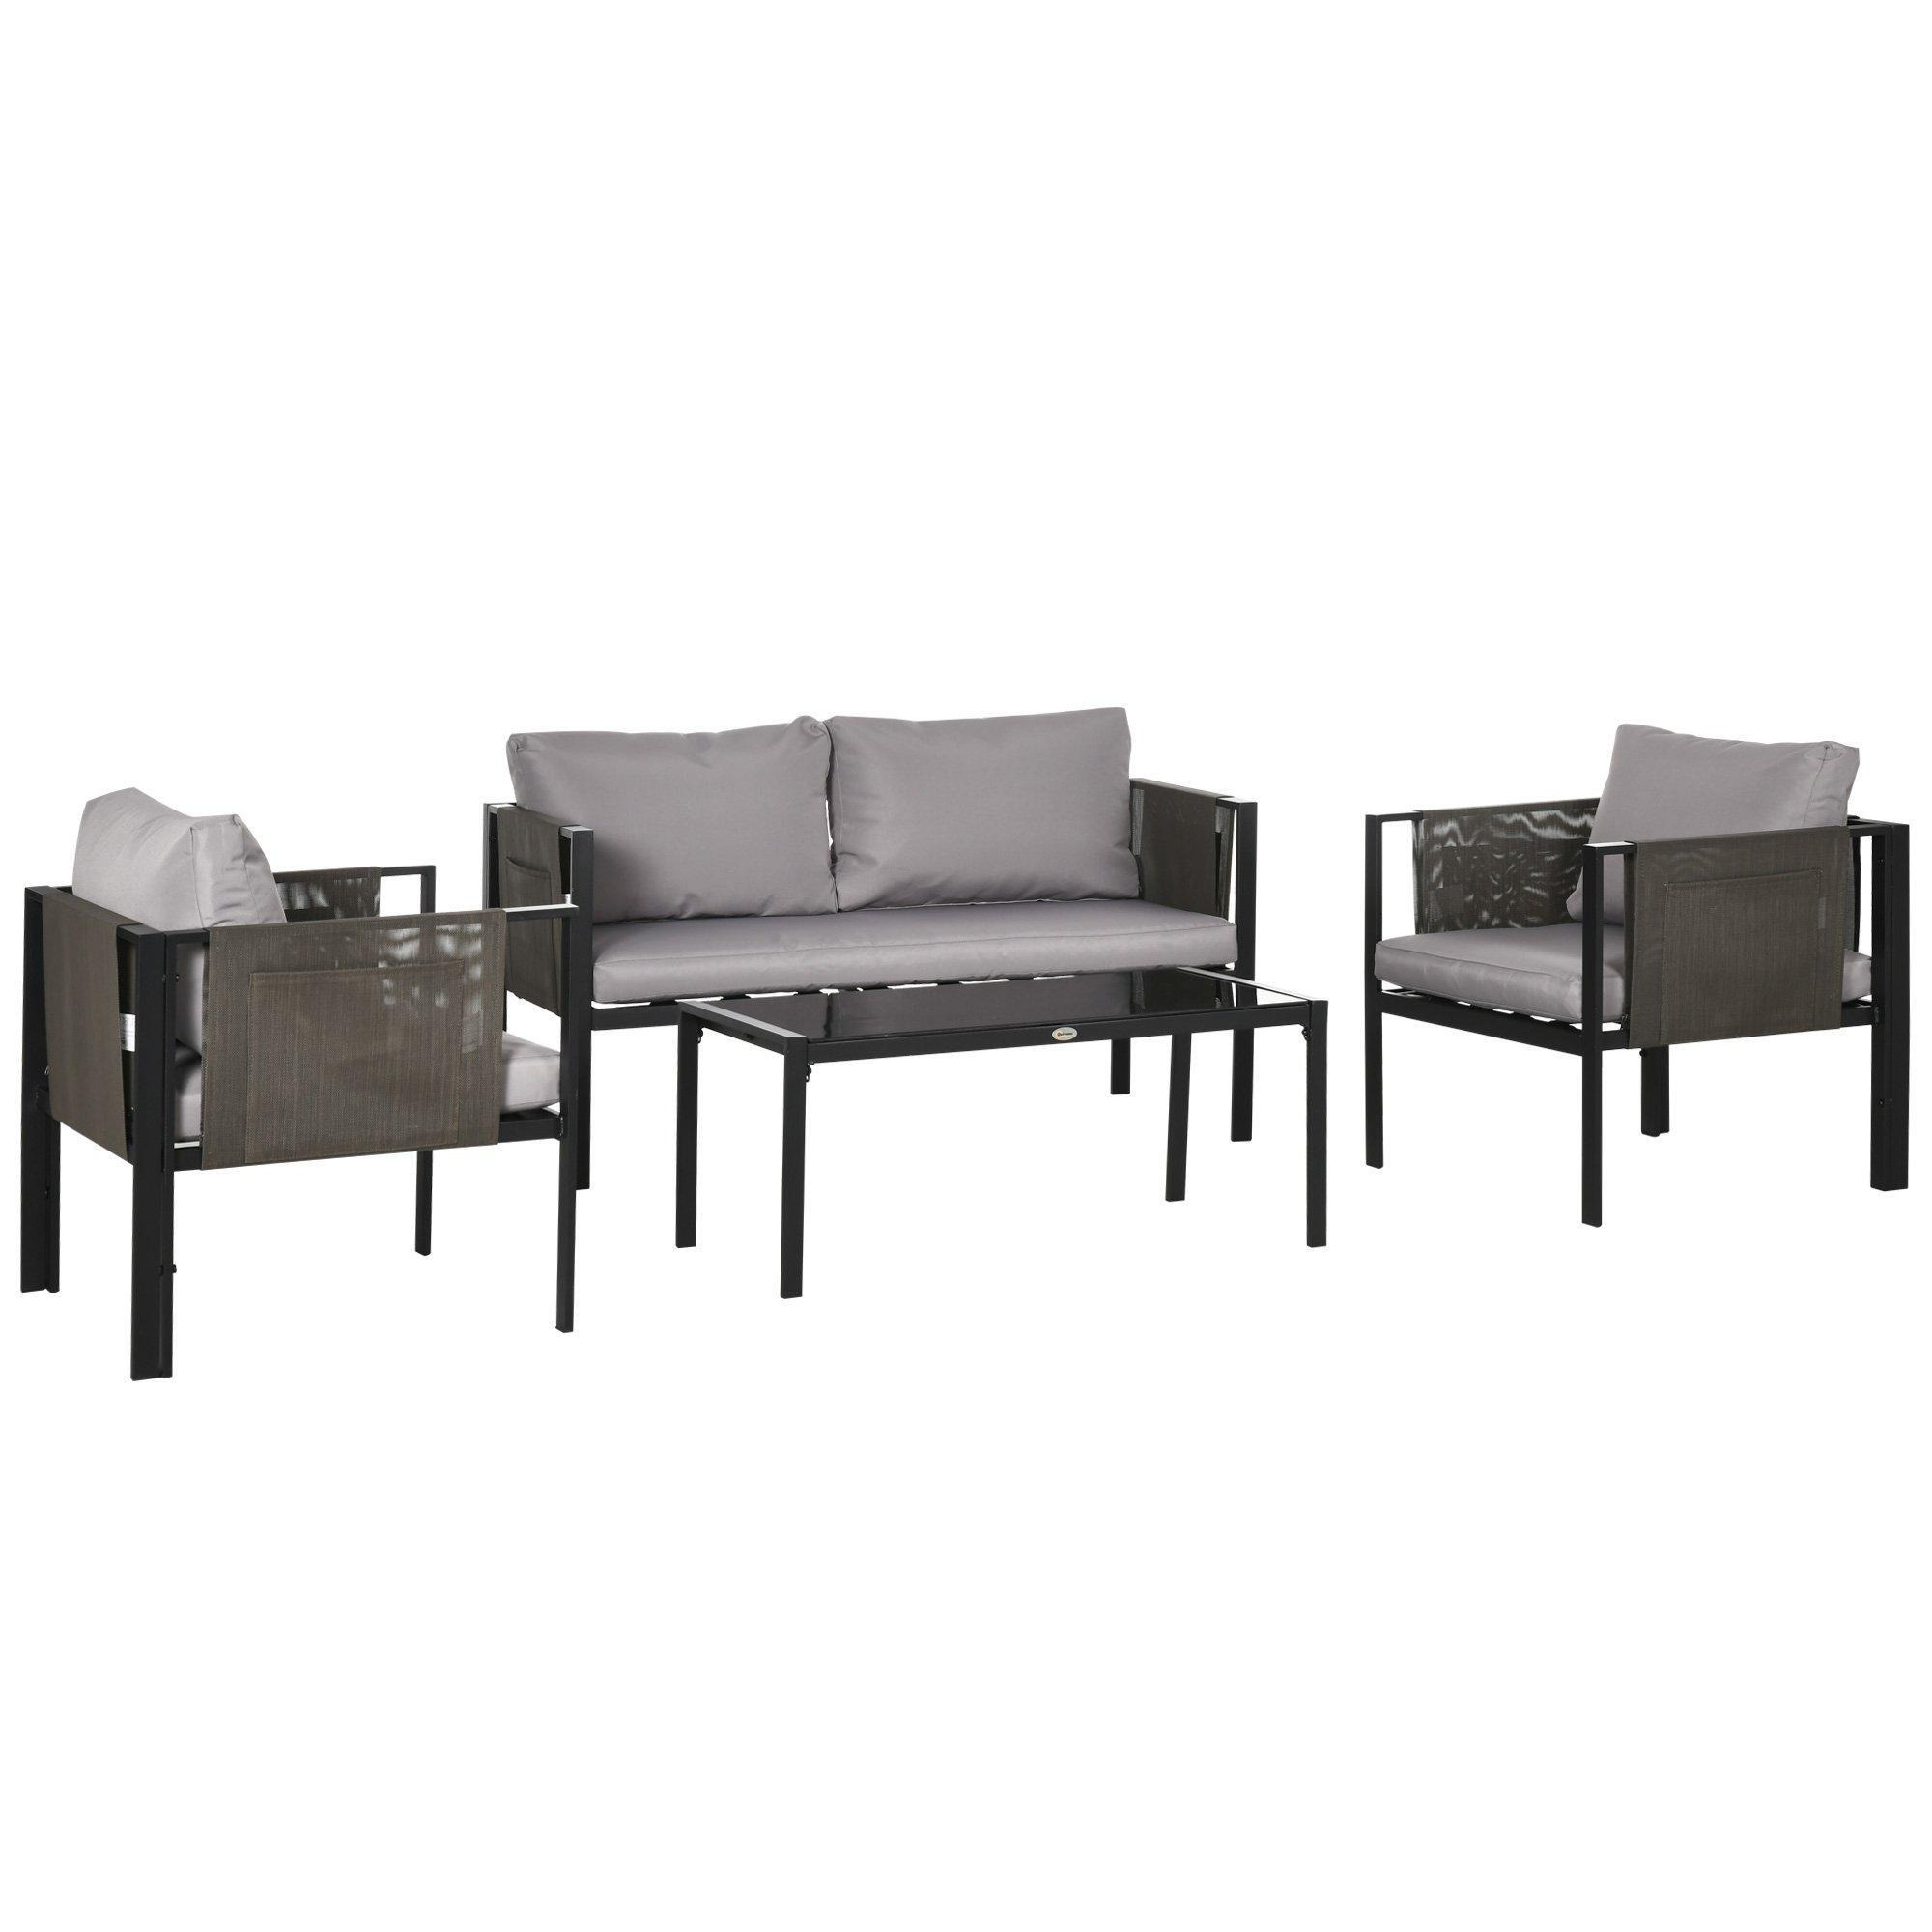 4 Piece Garden Sofa Setwith Tempered Glass Coffee Table Padded Cushion - image 1